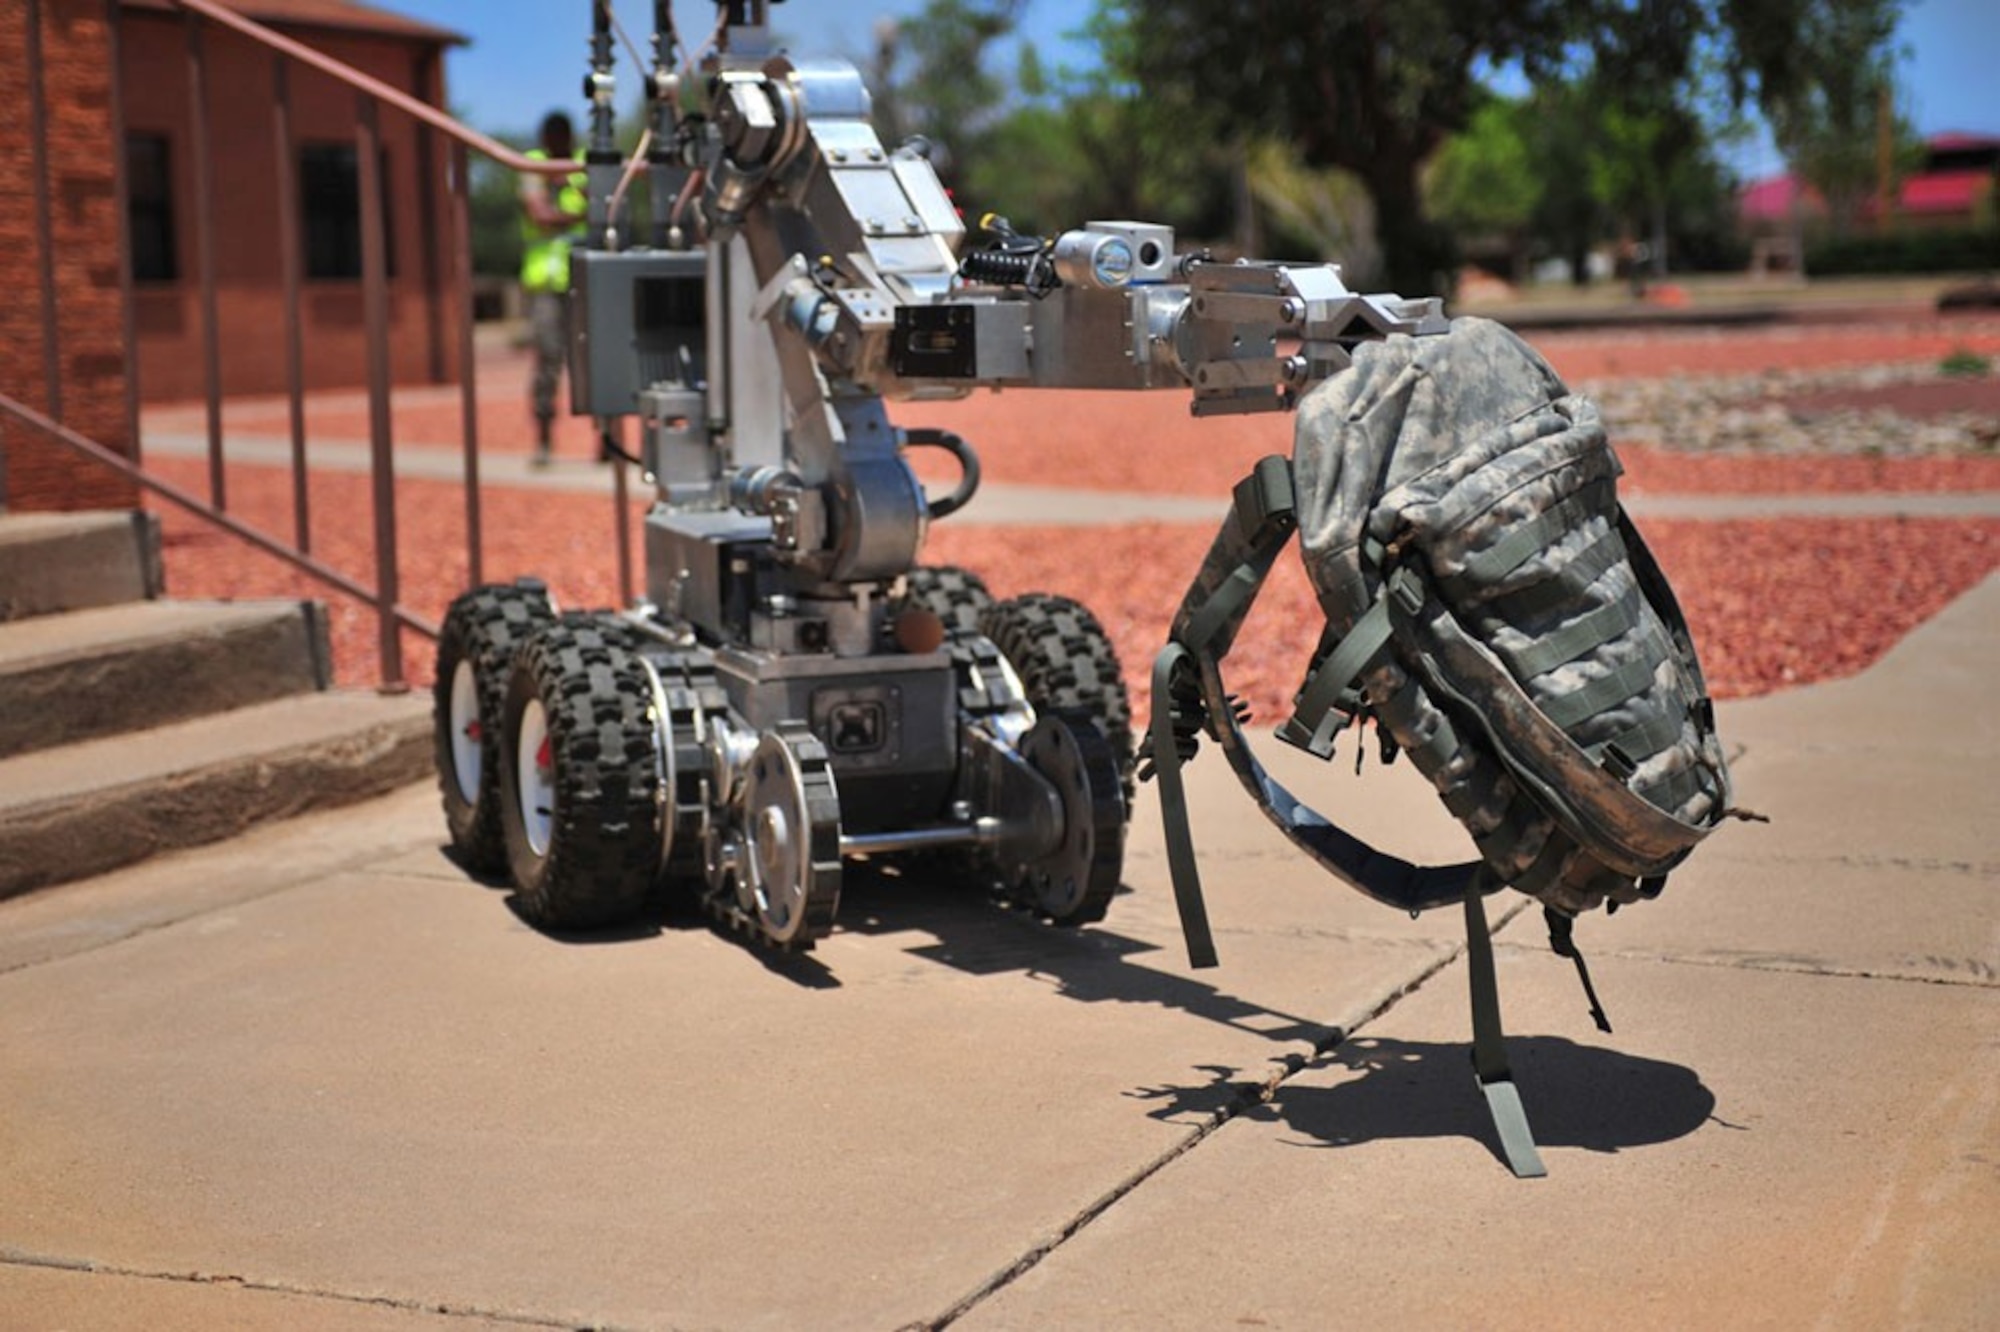 An explosive ordnance disposal technician mobilizes a robot to remotely identify a suspicious device as part of a training exercise. EOD technicians commonly use robots as a method of first entry to keep themselves safe during crisis response situations. (U.S. Air Force photo)